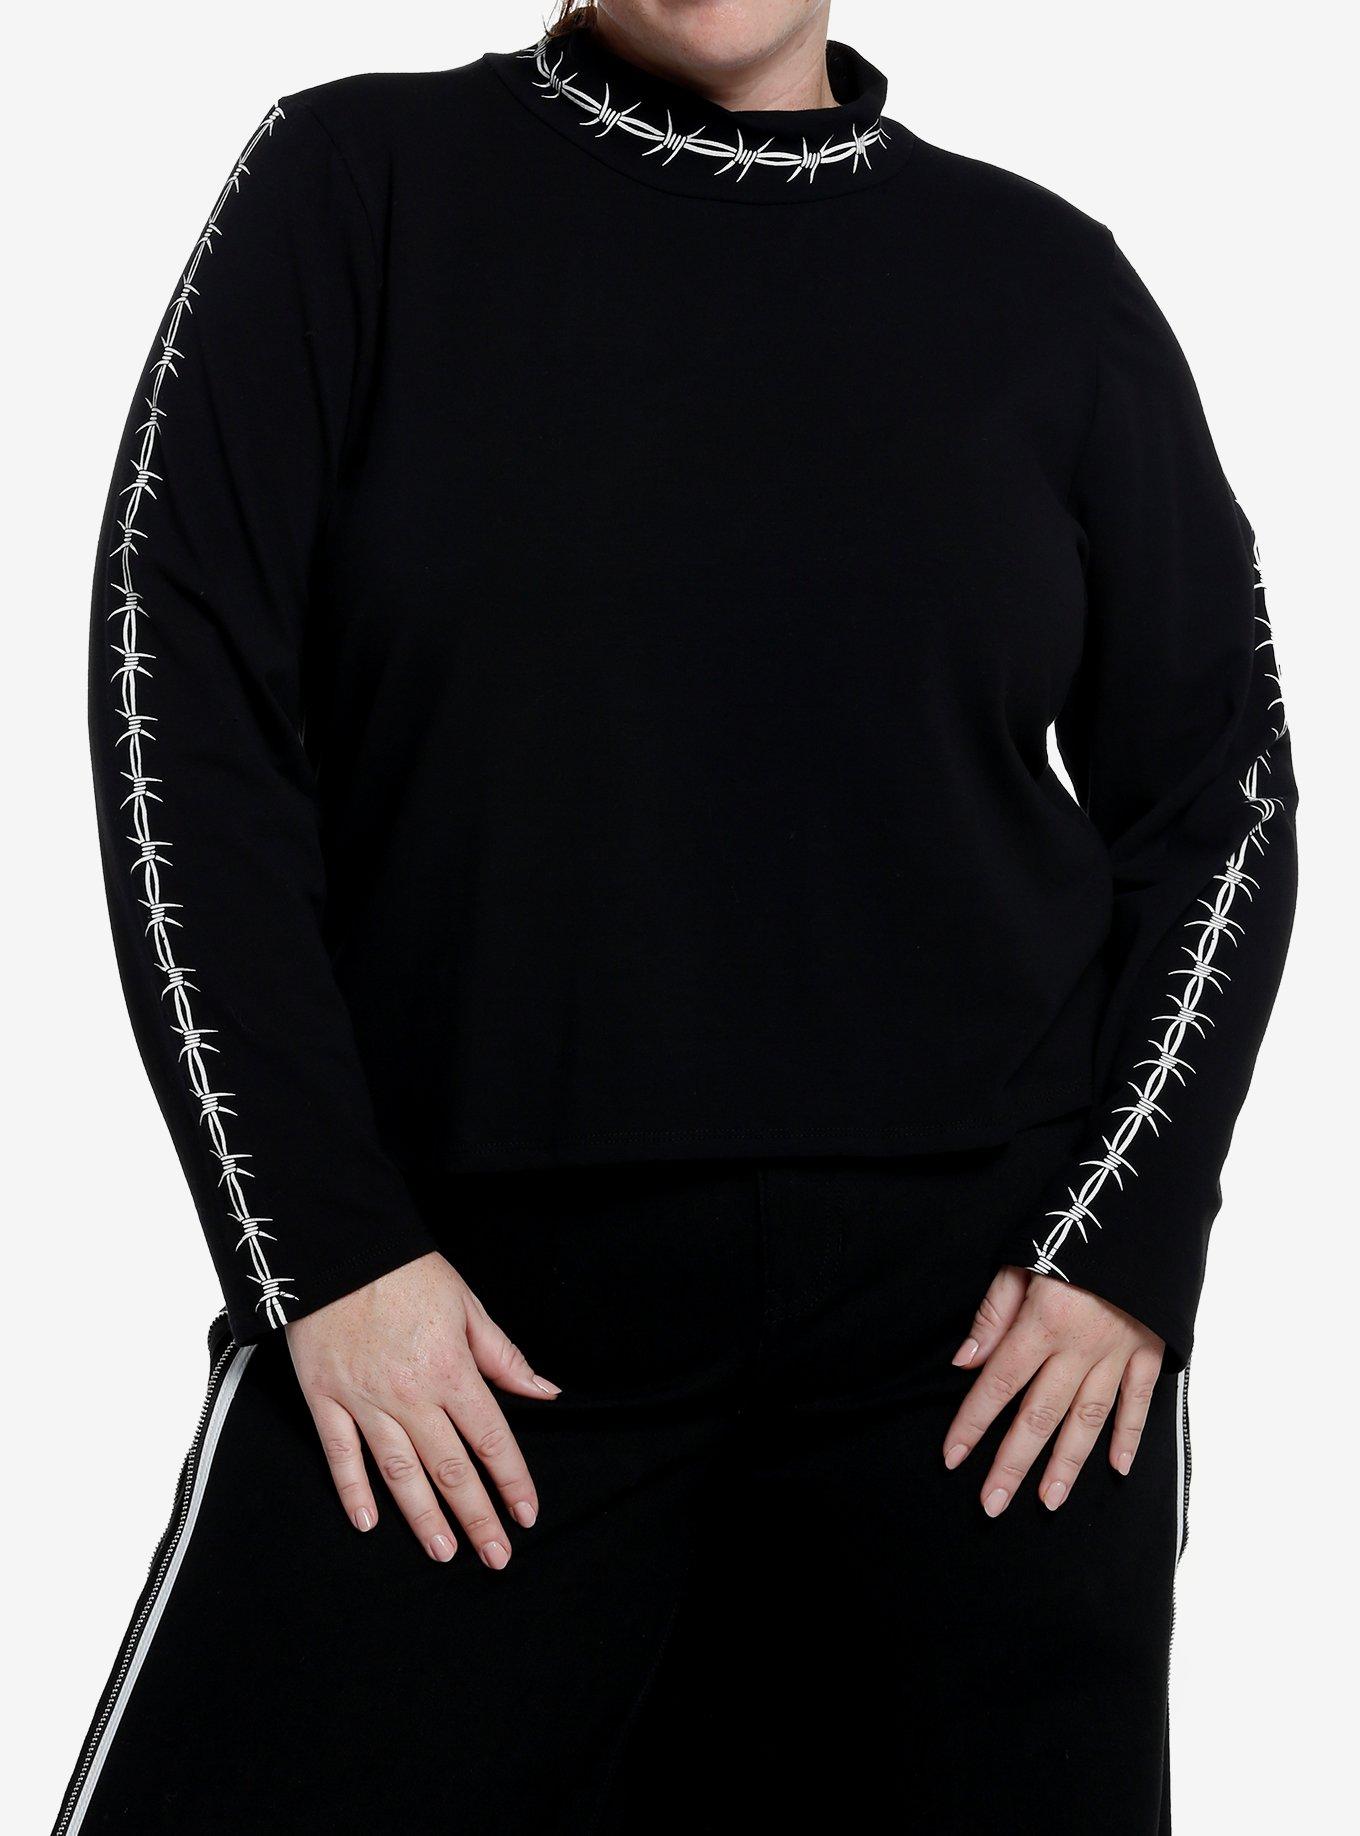 Social Collision Barbed Wire Girls Crop Long-Sleeve Top Plus Size, , hi-res